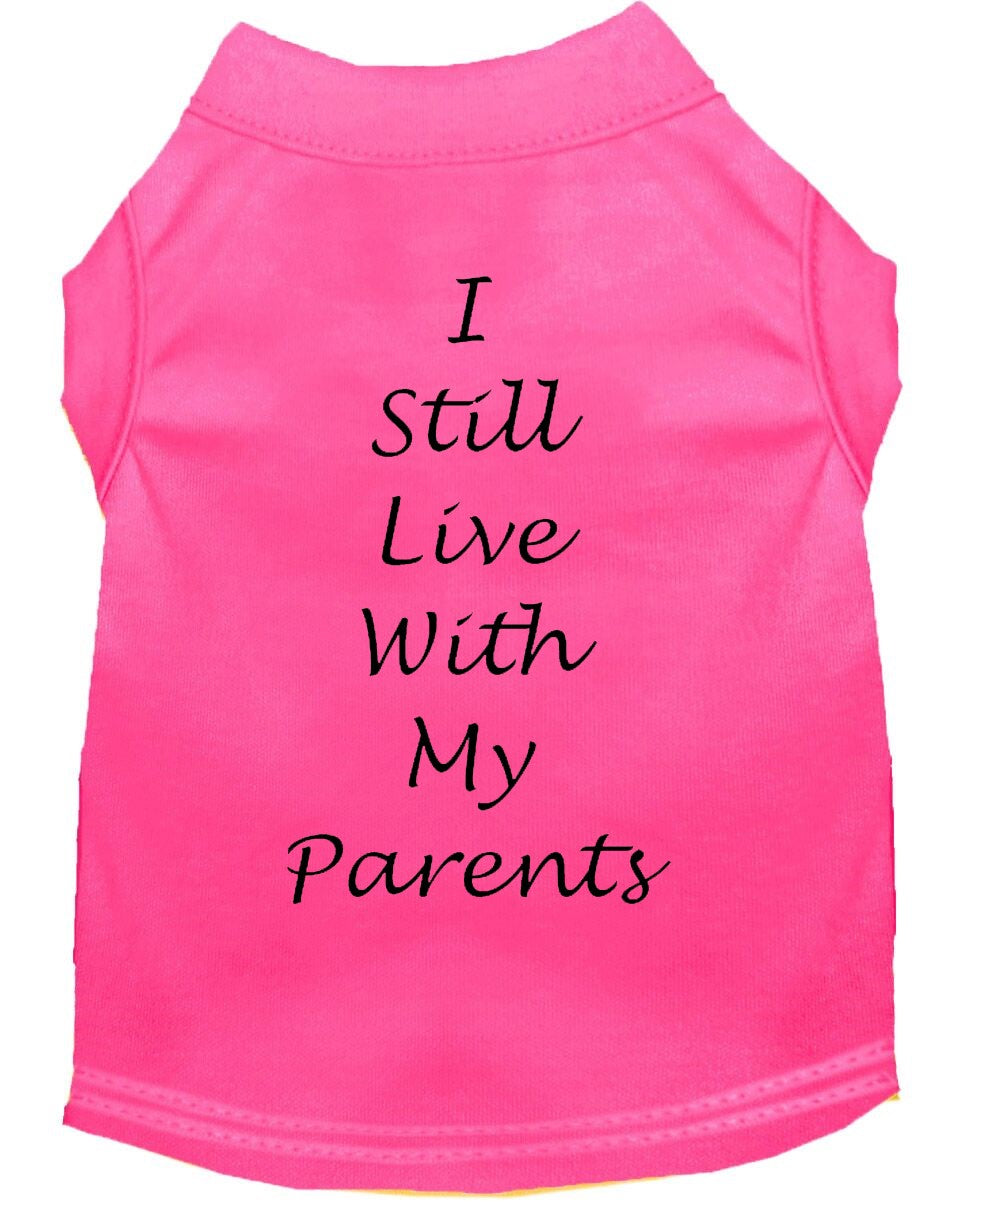 I Still Live With My Parents Dog Shirt Pink